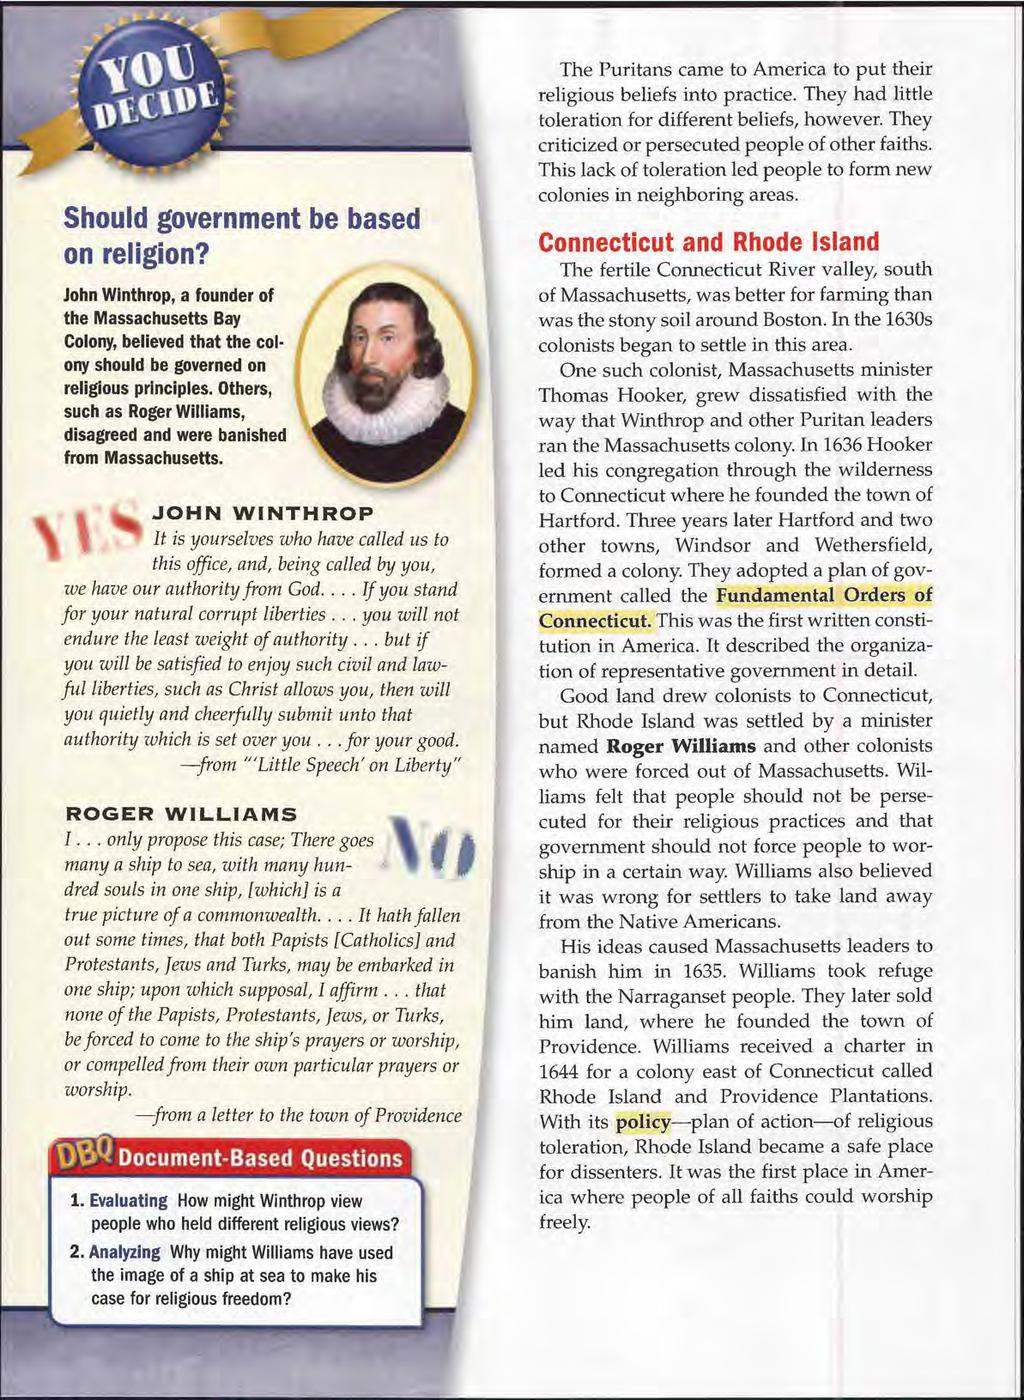 Should government be based on religion? John Winthrop, a founder of the Massachusetts Bay Colony, believed that the colony should be governed on religious principles.